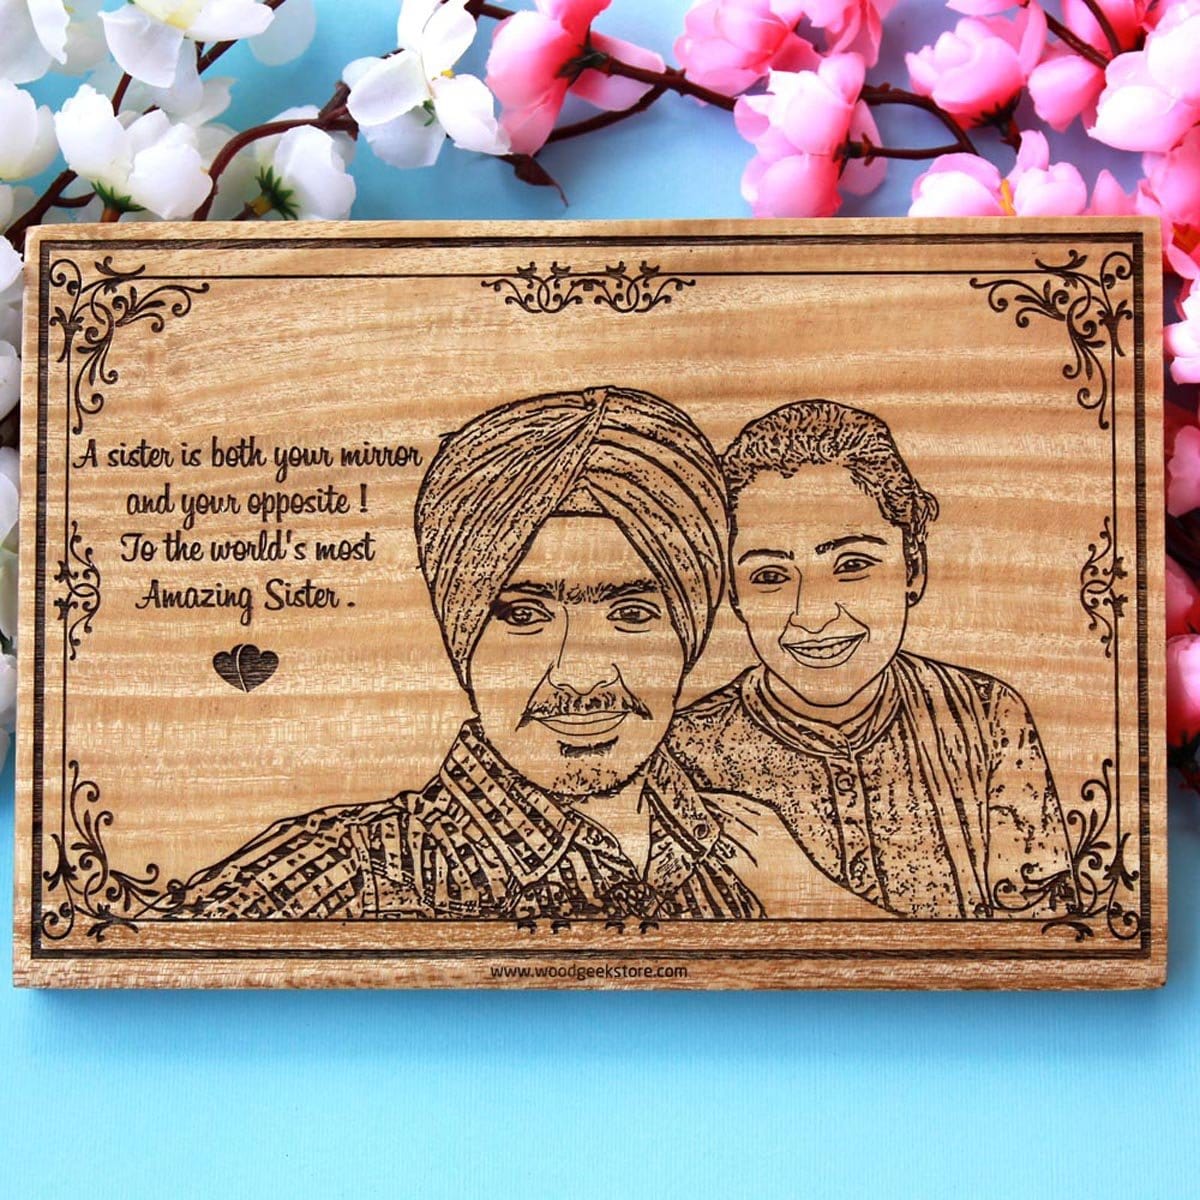 A sister is both your mirror and your opposite. To the world's most amazing sister.  Looking for Rakhi gifts for sister or birthday gifts for sister? This photo on wood is the best gift for her.